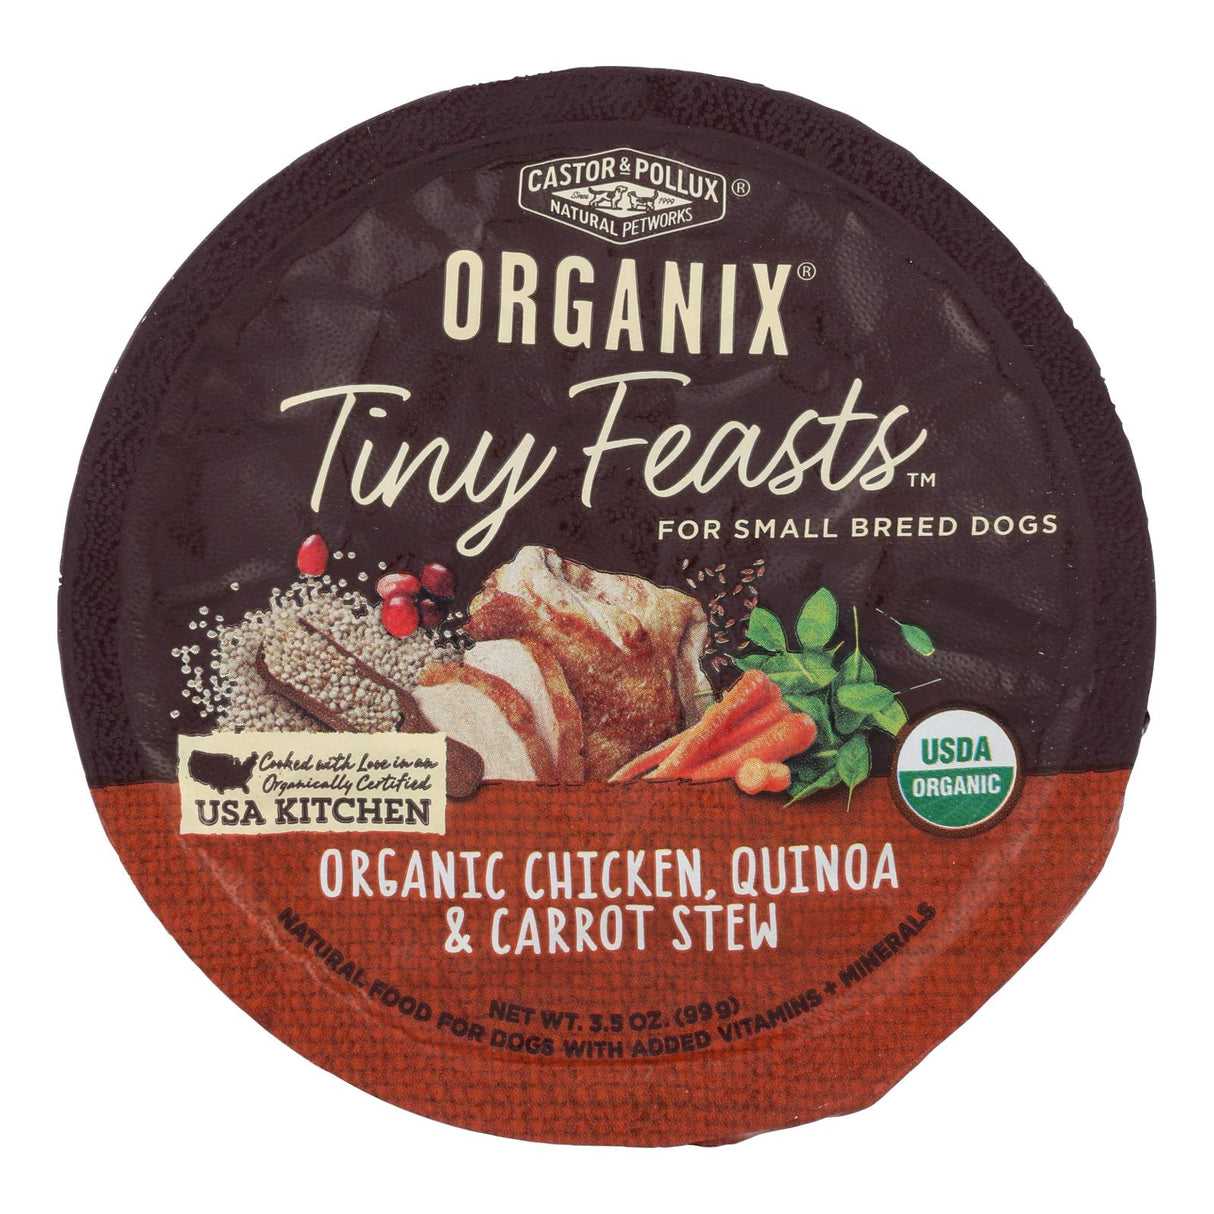 Castor & Pollux Organix Tiny Feasts Chicken & Quinoa Stew with Carrots (Pack of 12 - 3.5 Oz.) - Cozy Farm 